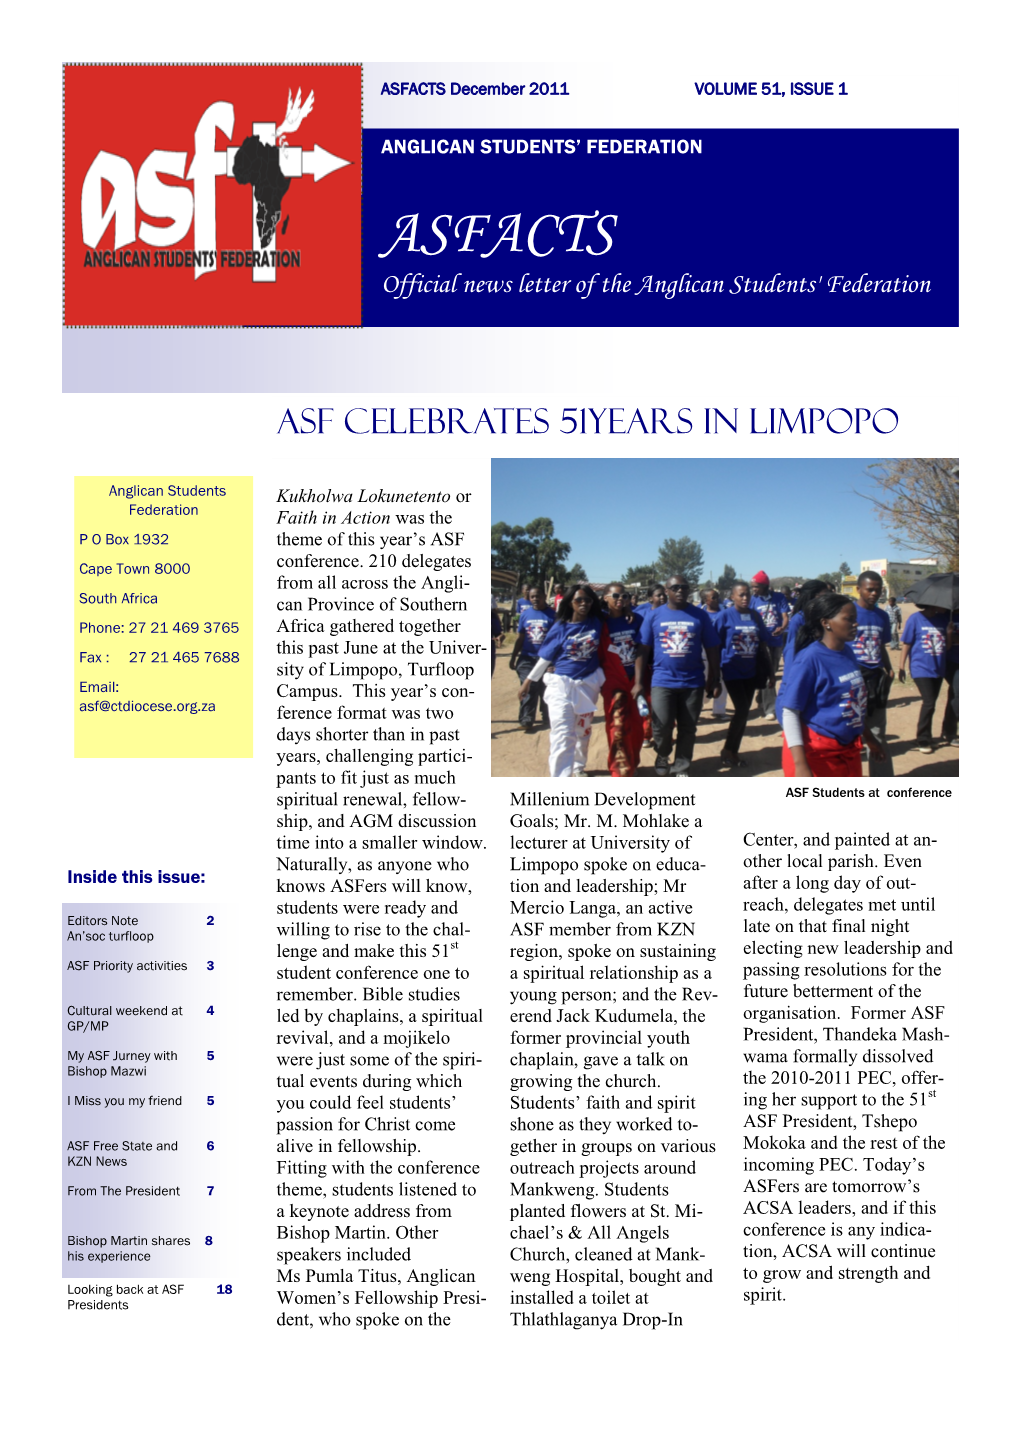 Asfacts Volume 51, Issue 1